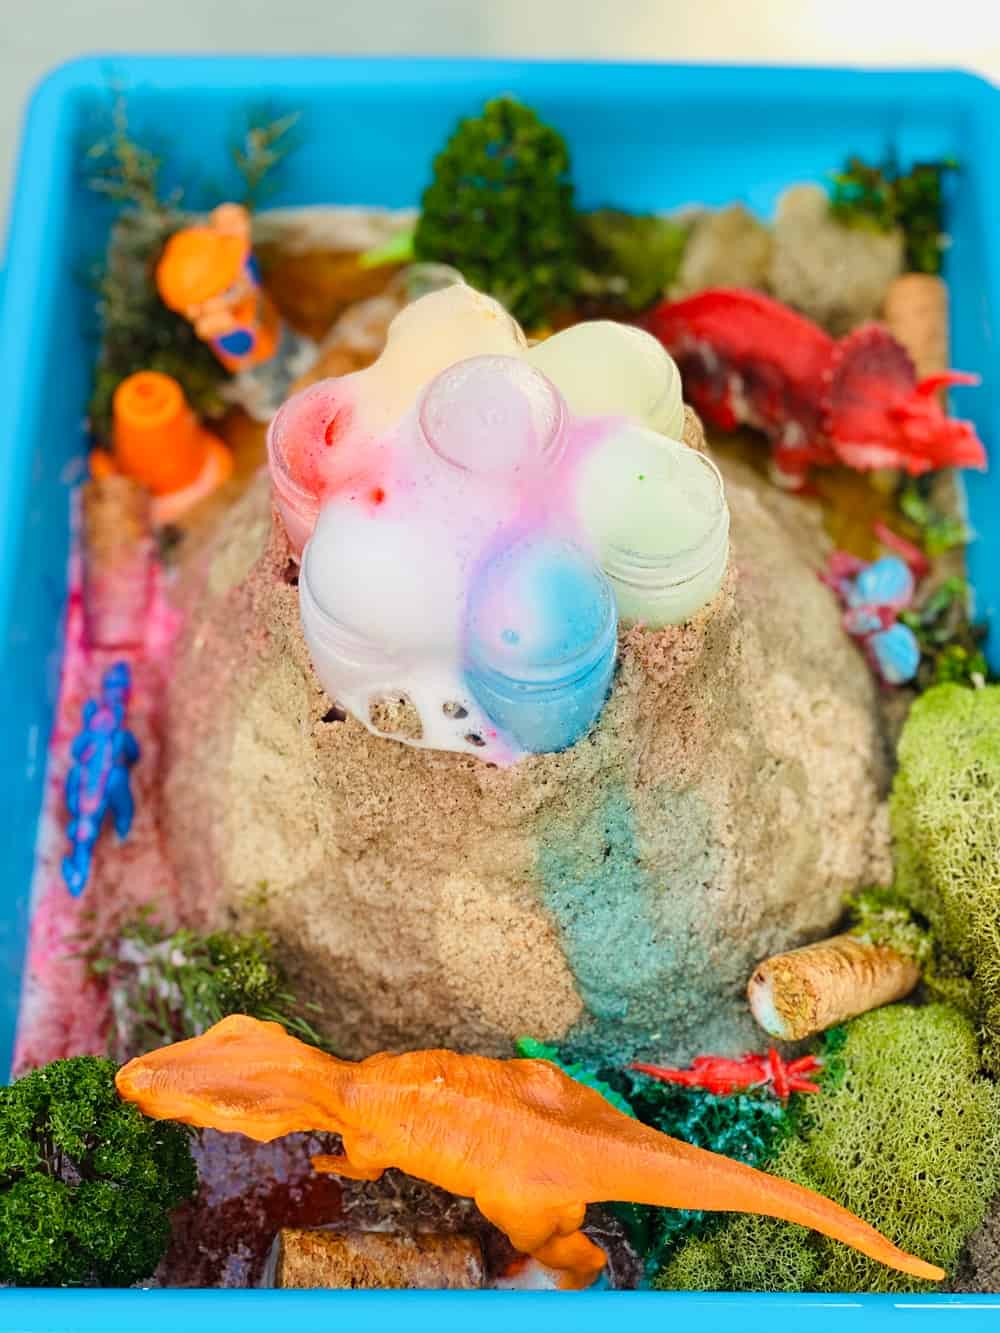 rainbow baking soda volcano science experiment for kids with toy dinosaurs